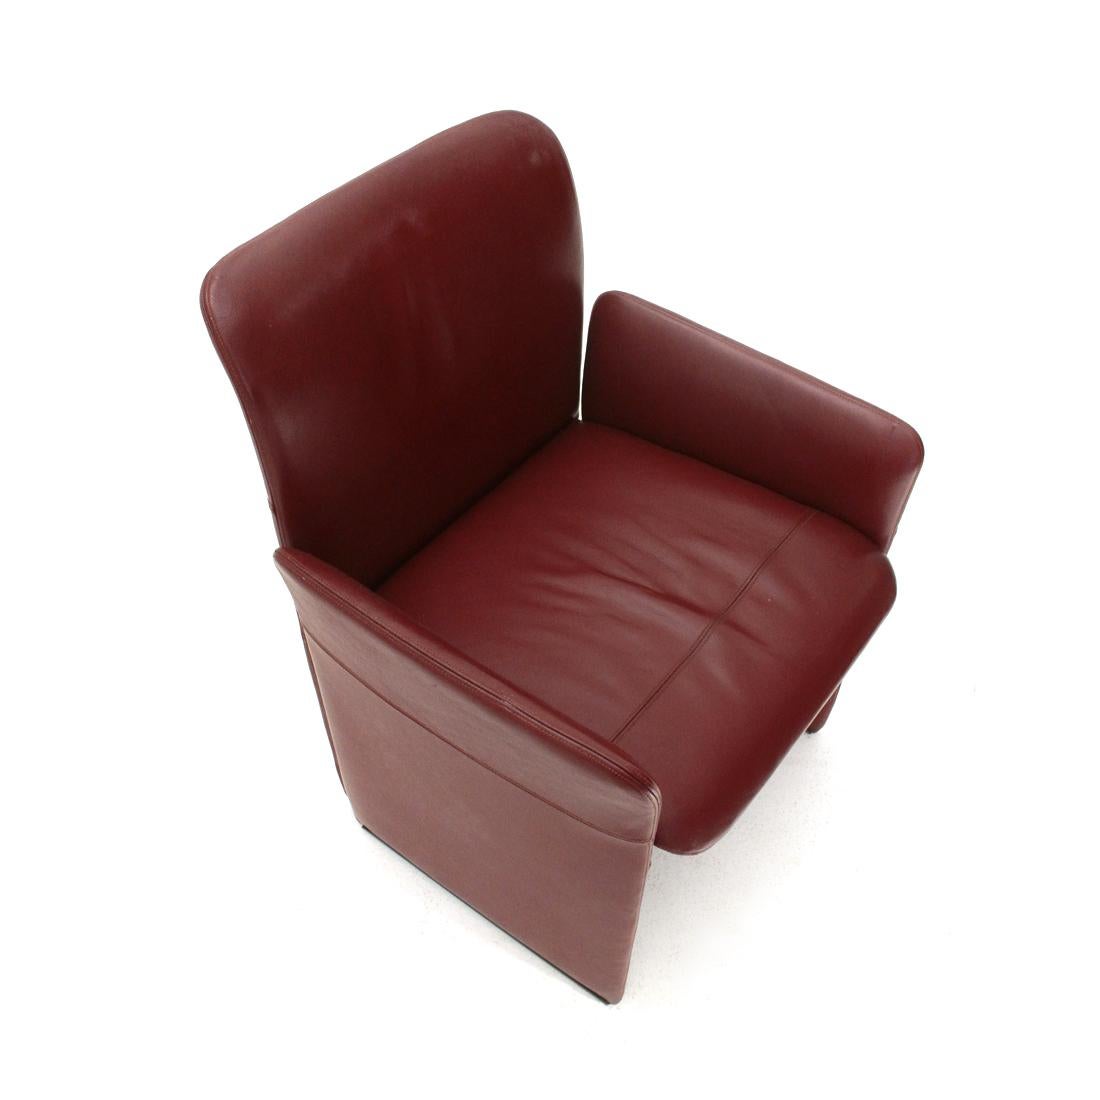 Chair produced in the 1980s by Saporiti based on a design by Giovanni Offredi.
Structure made up of 4 modules in padded metal and lined in burgundy leather.
Ground support edge in black plastic.
Good general condition, some stains and burn